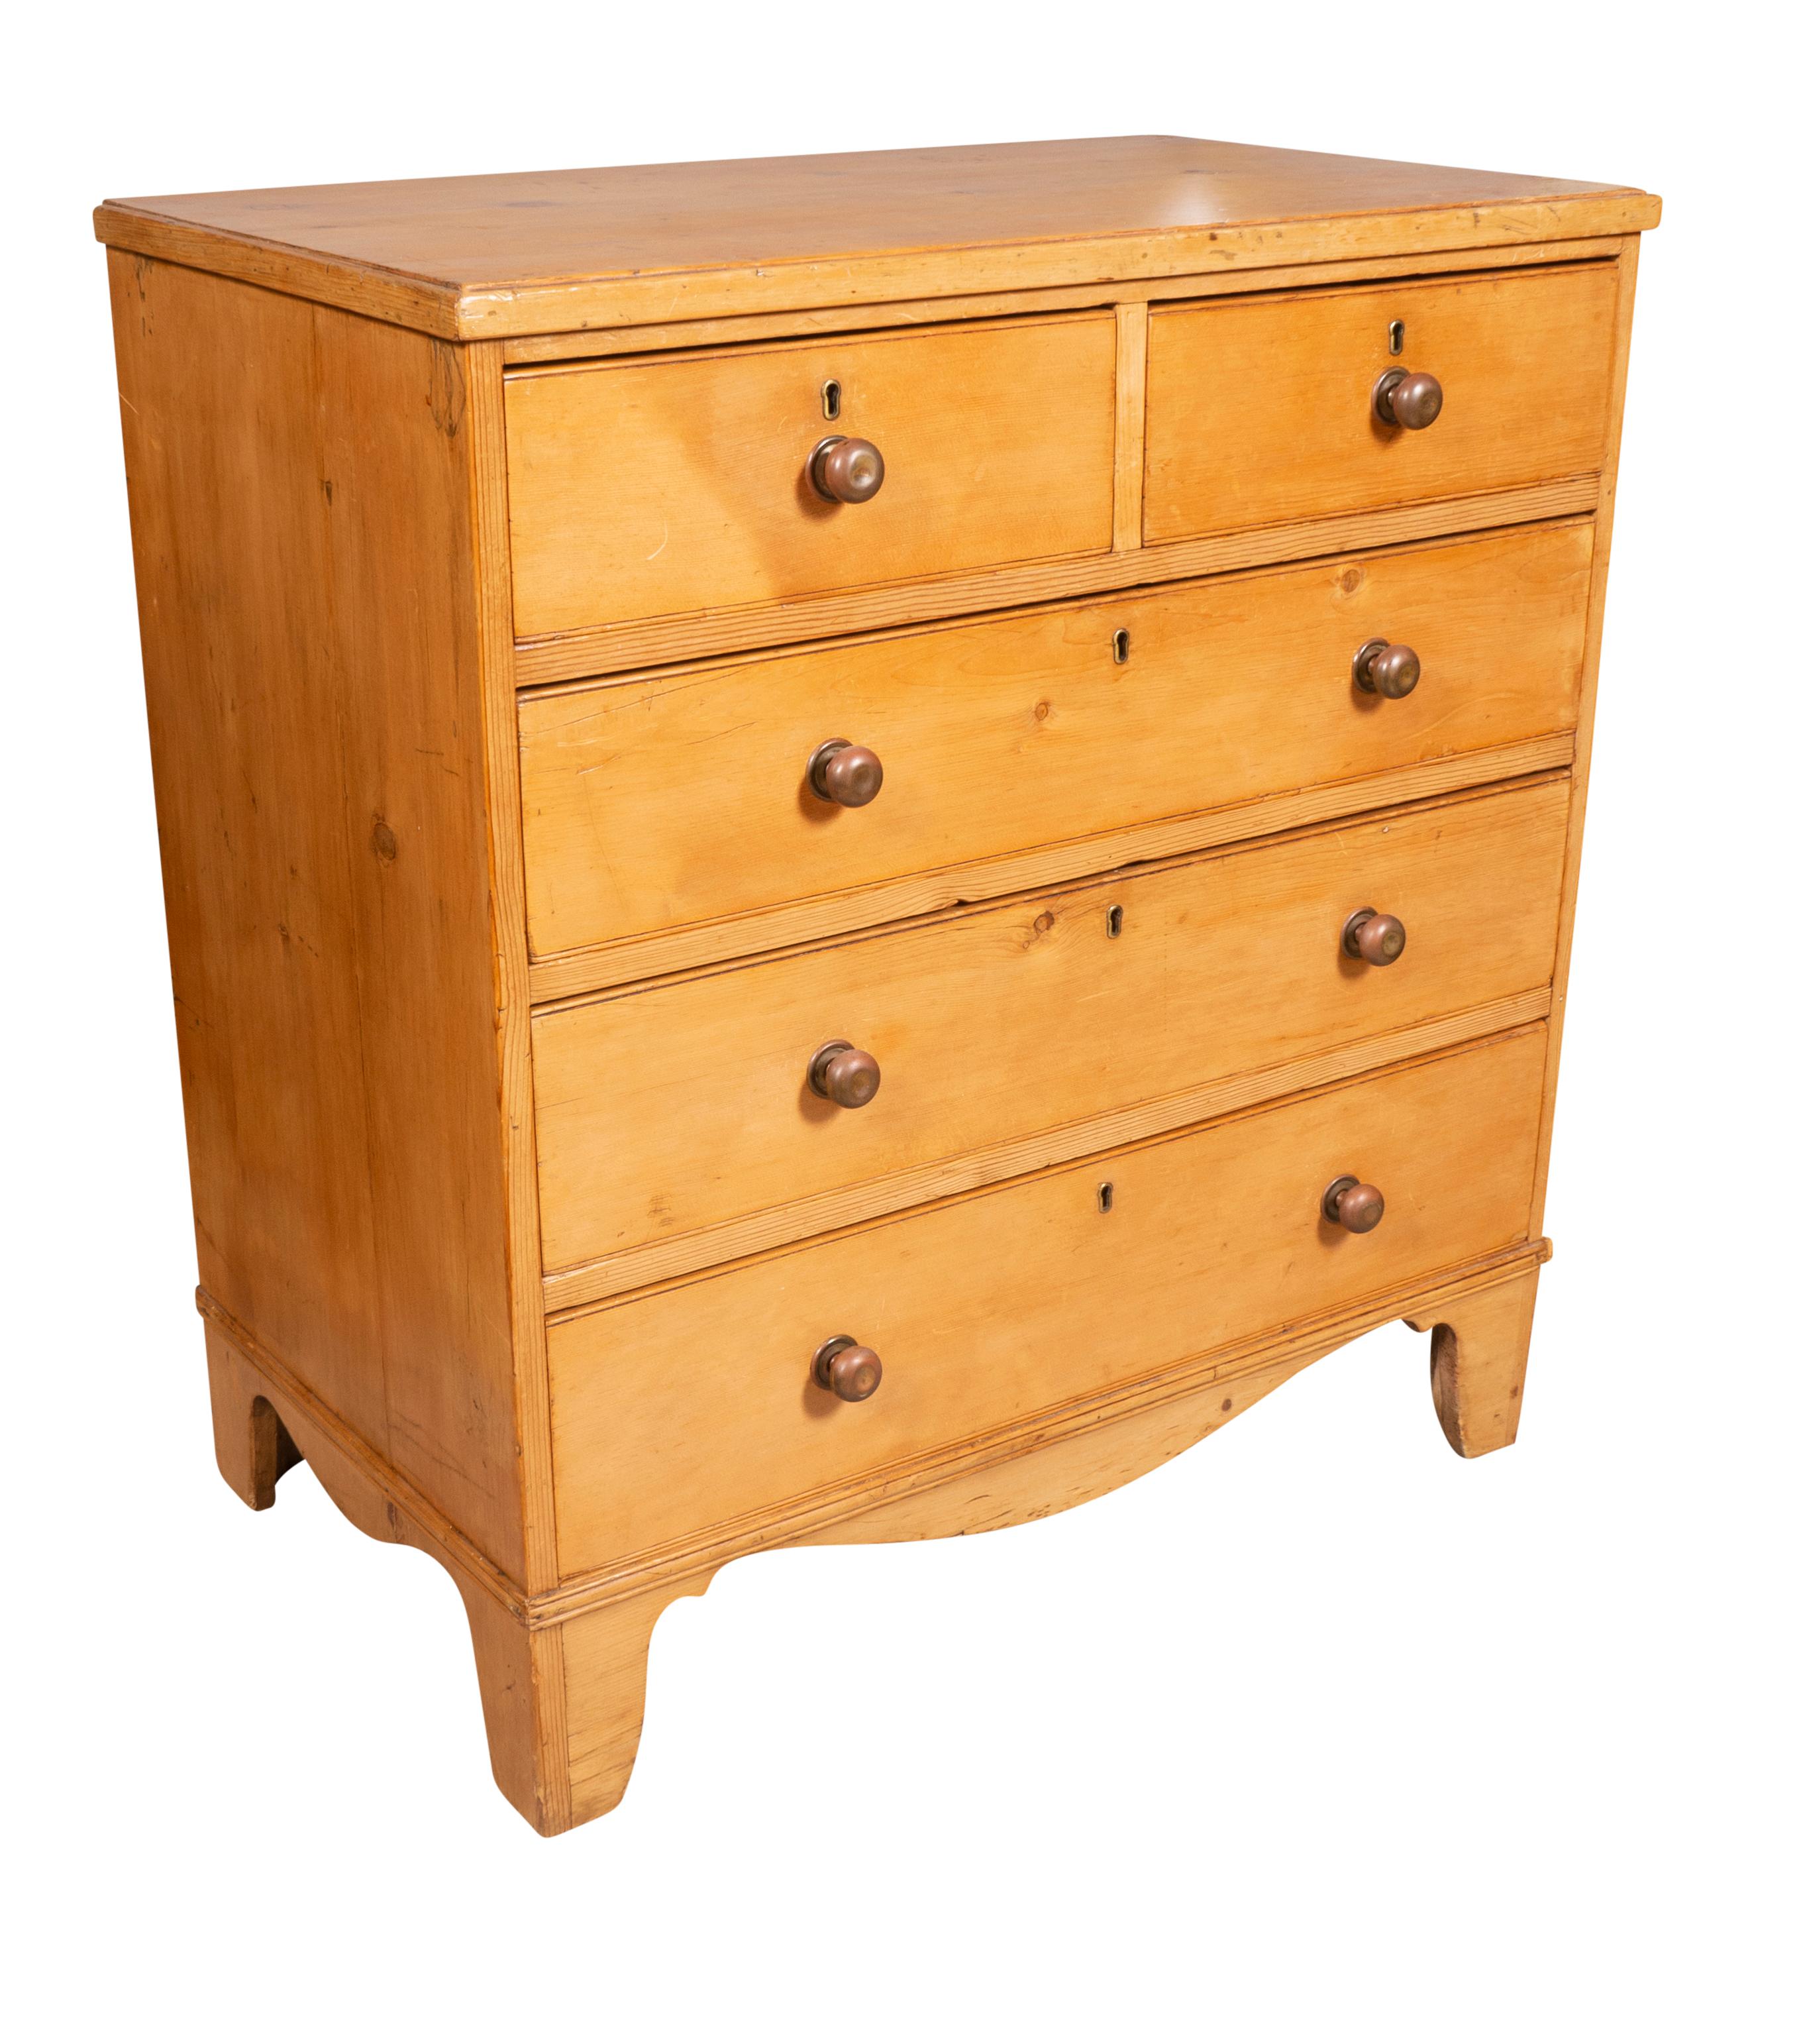 With a rectangular top over two short and three long drawers all with brass knobs. Bracket feet.